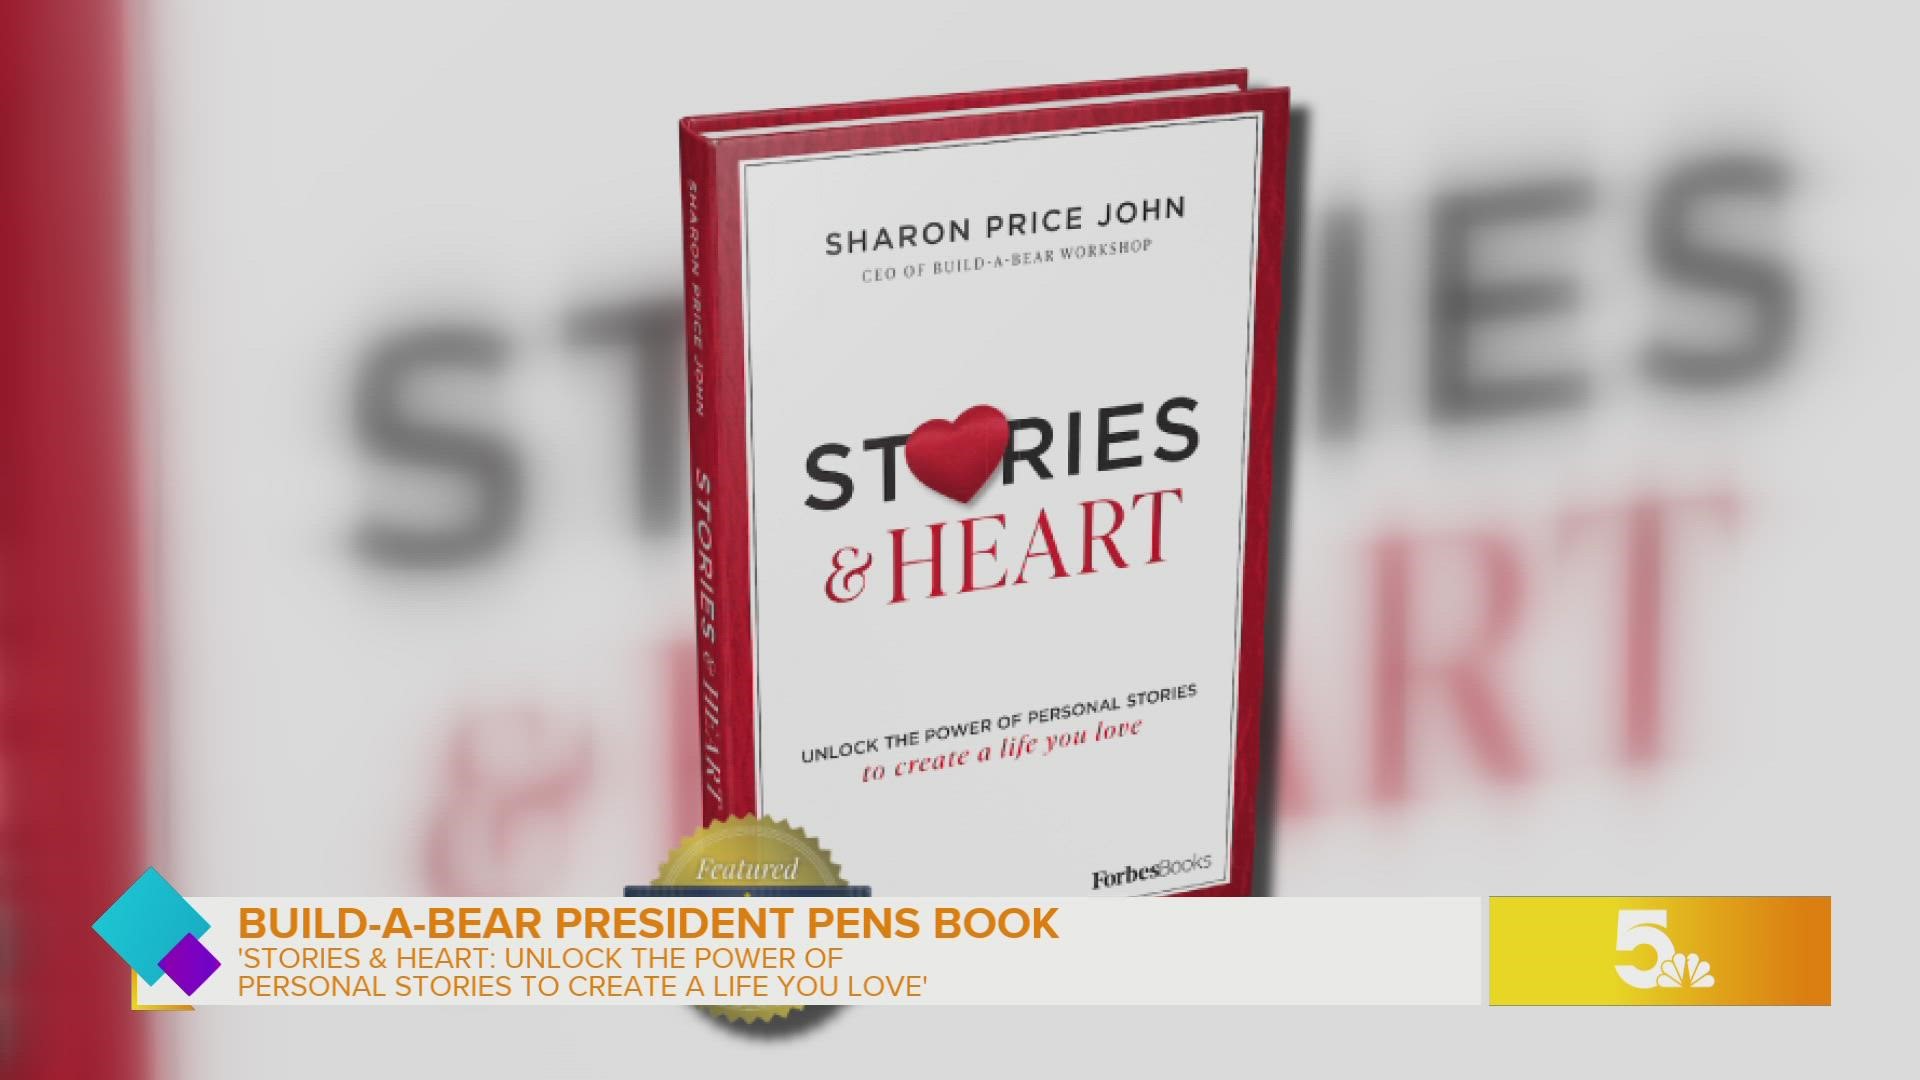 'Stories & Heart: Unlock the Power of Personal Stories to create a life you love' will be available for purchase on Amazon beginning January 17, 2023.